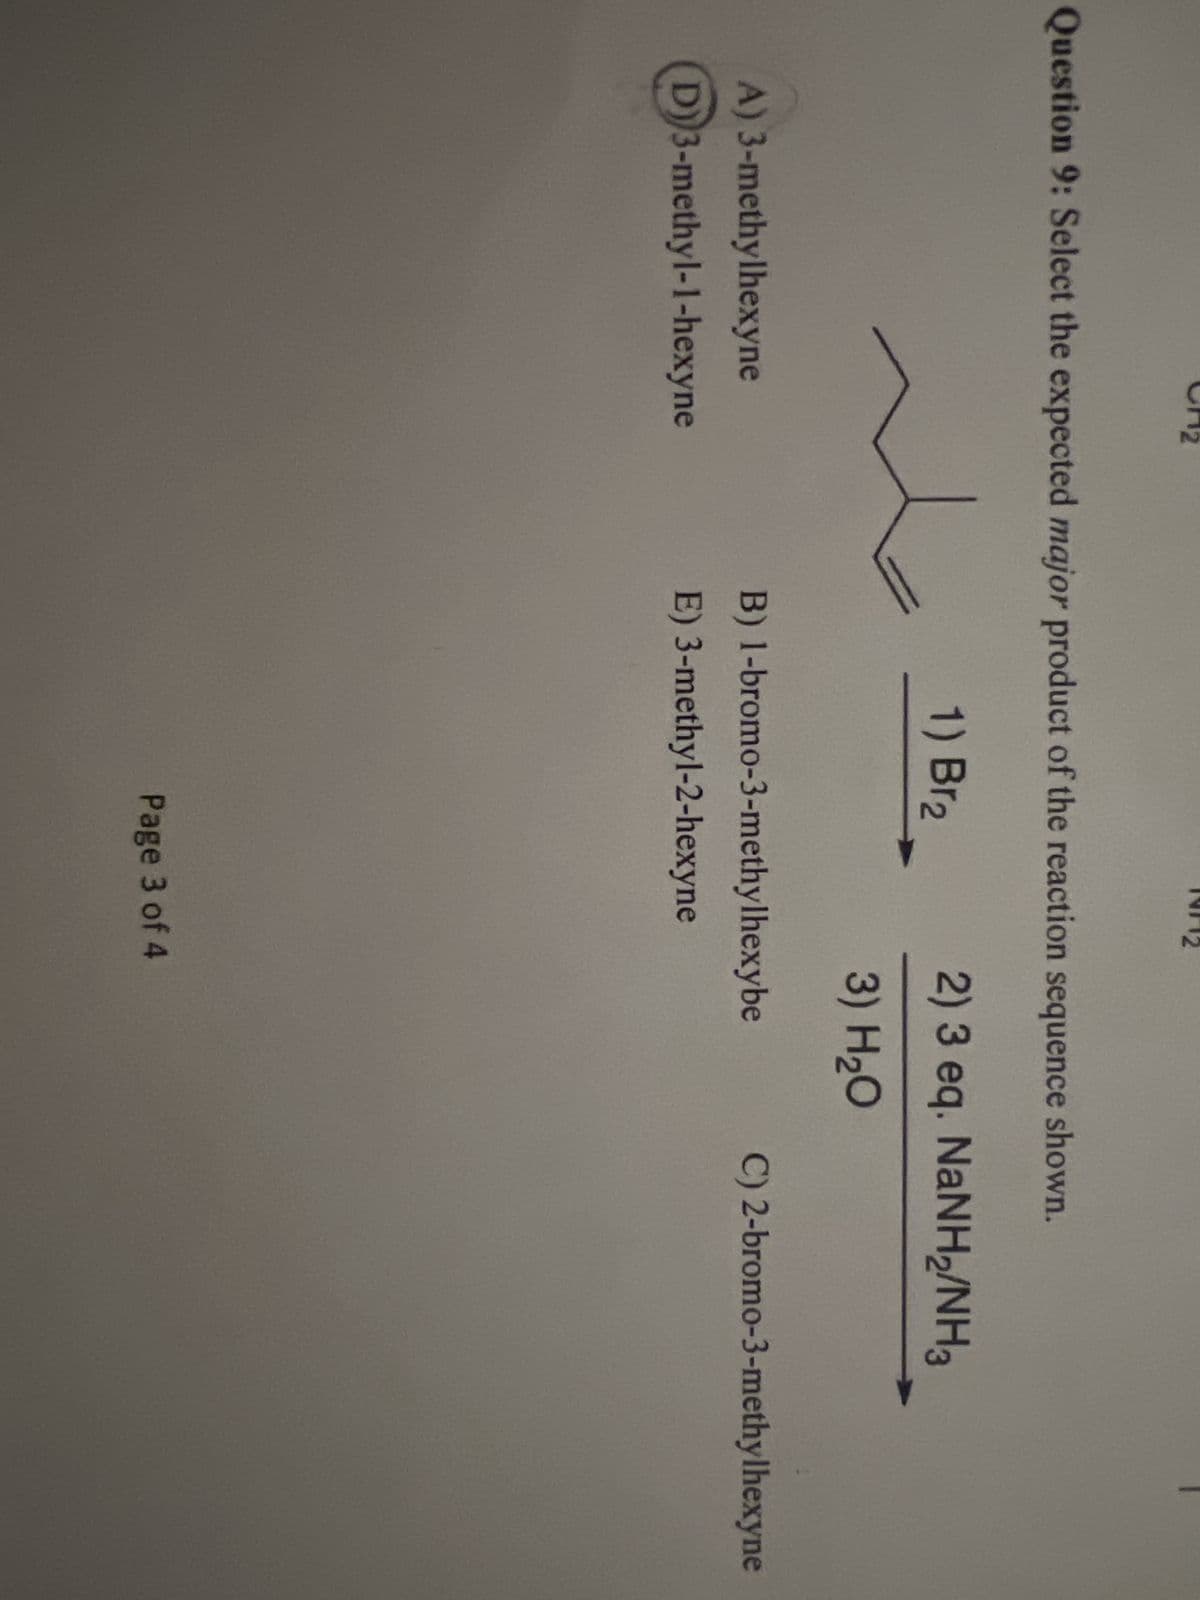 Question 9: Select the expected major product of the reaction sequence shown.
1) Br2
2) 3 eq. NaNH2/NH3
3) H₂O
B) 1-bromo-3-methylhexybe
C) 2-bromo-3-methylhexyne
A) 3-methylhexyne
D) 3-methyl-1-hexyne
E) 3-methyl-2-hexyne
Page 3 of 4